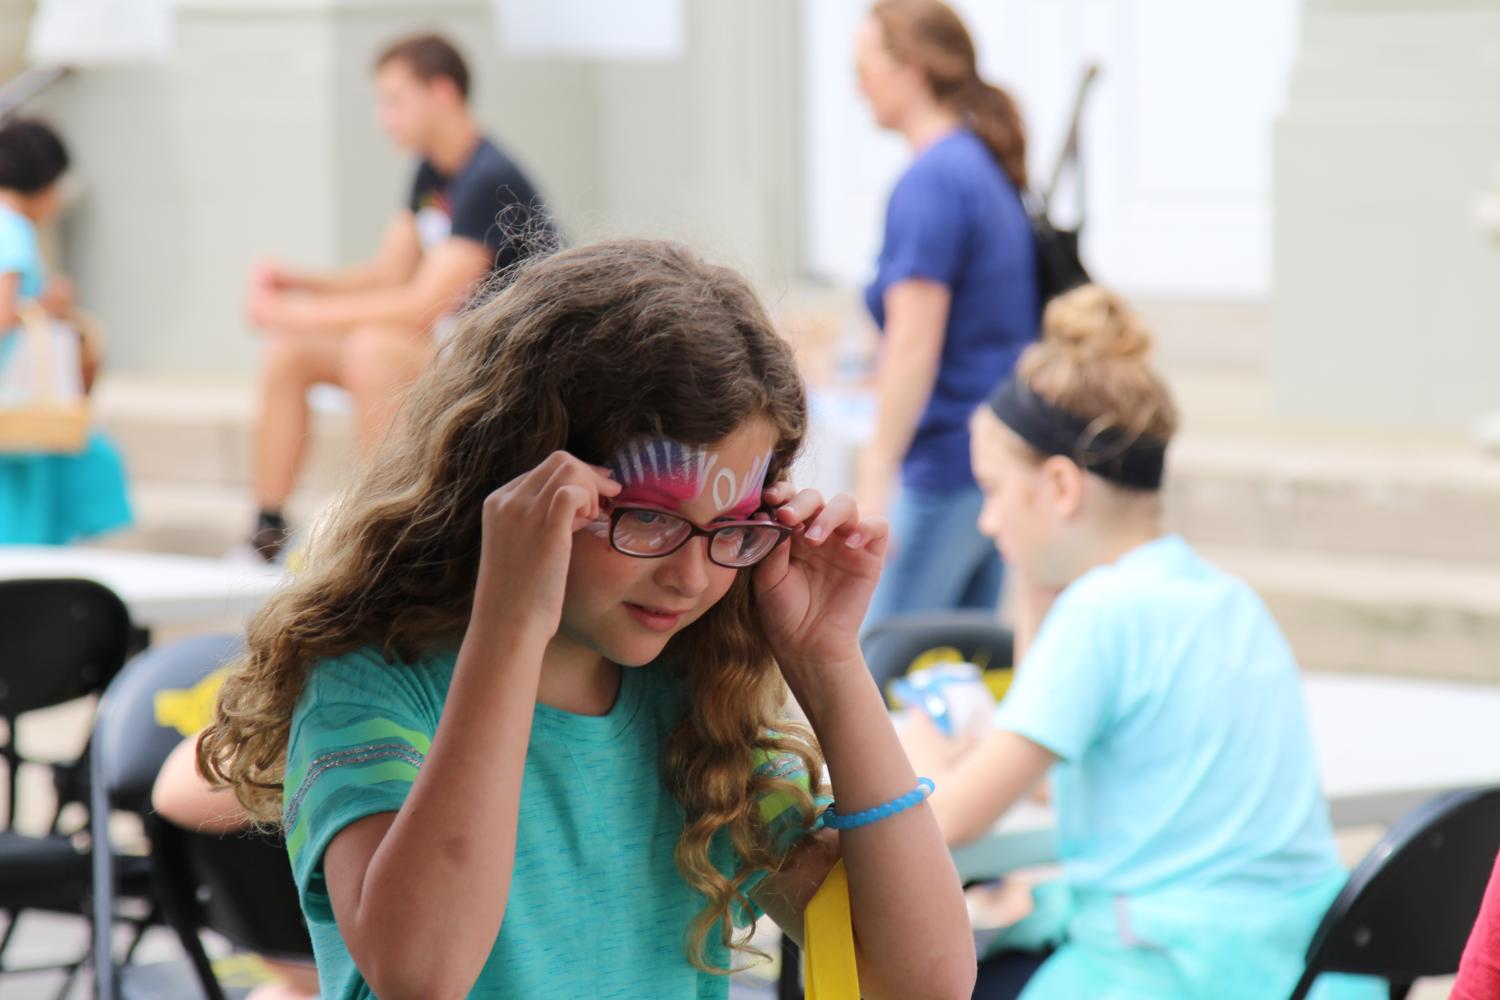 A young girl gets her face painted at Spark 